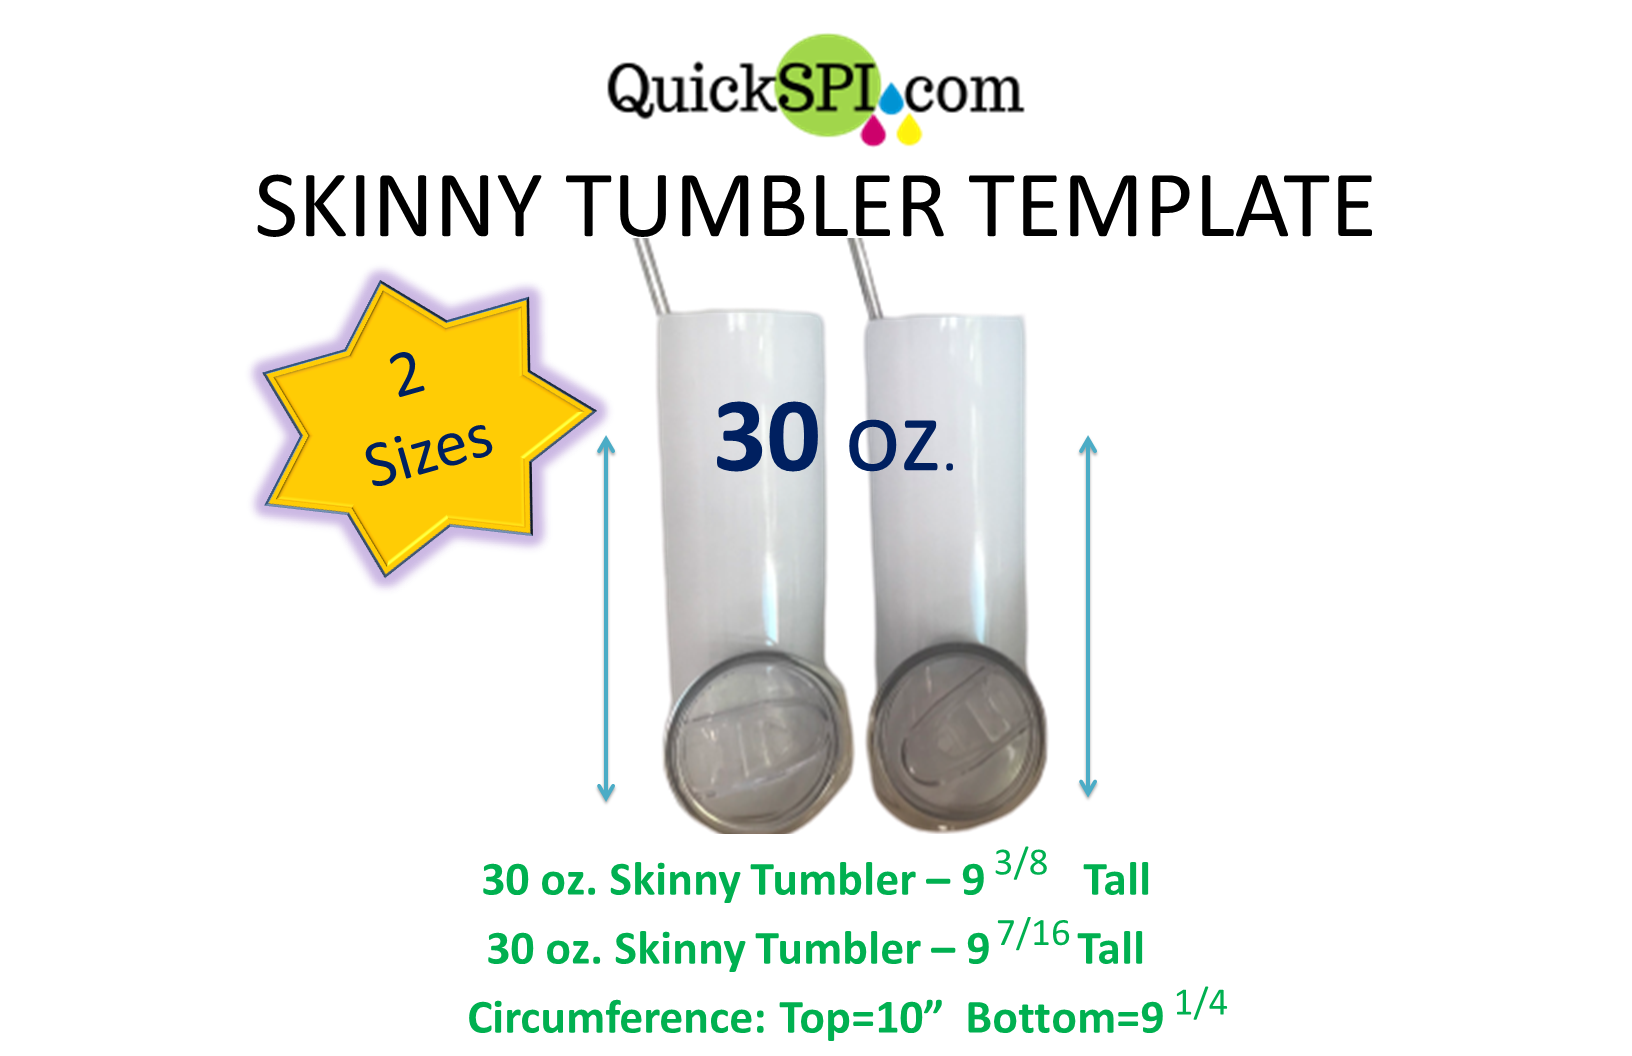 Skinny Tumbler curved Template for 30 ounce drinks.